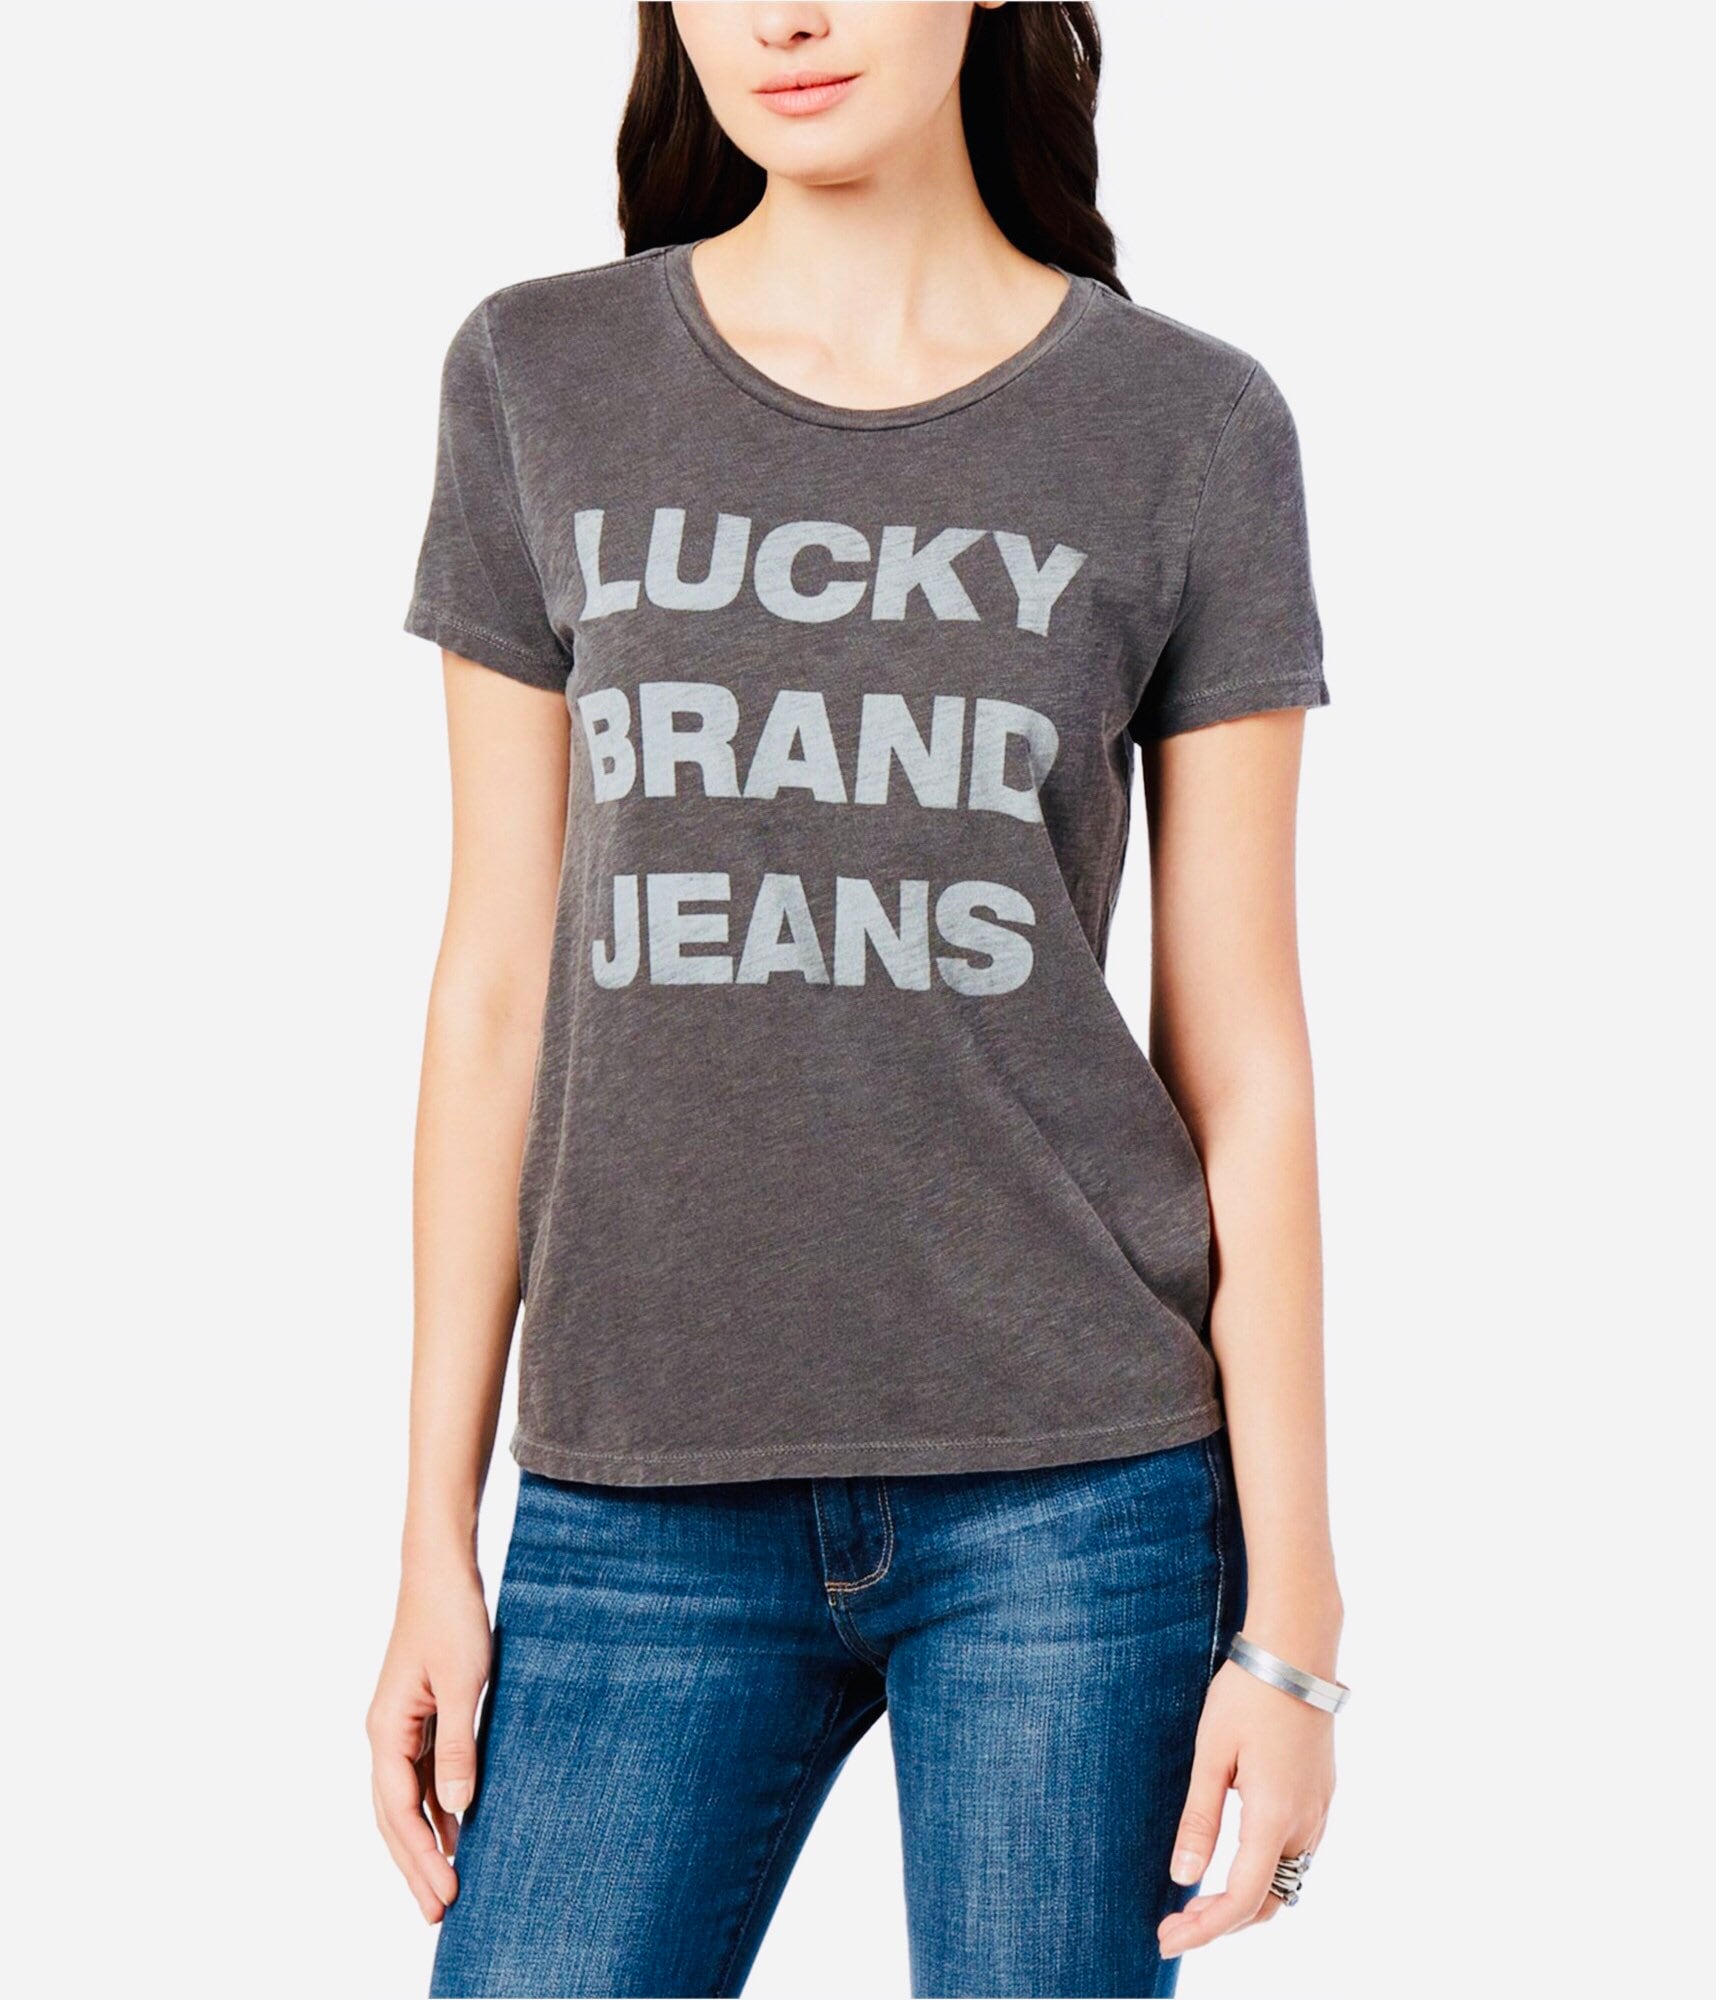 Lucky Jeans Vintage Tee Paper Thin Womens Lucky Brand Jeans Graphic T-shirt  Sz Sm 